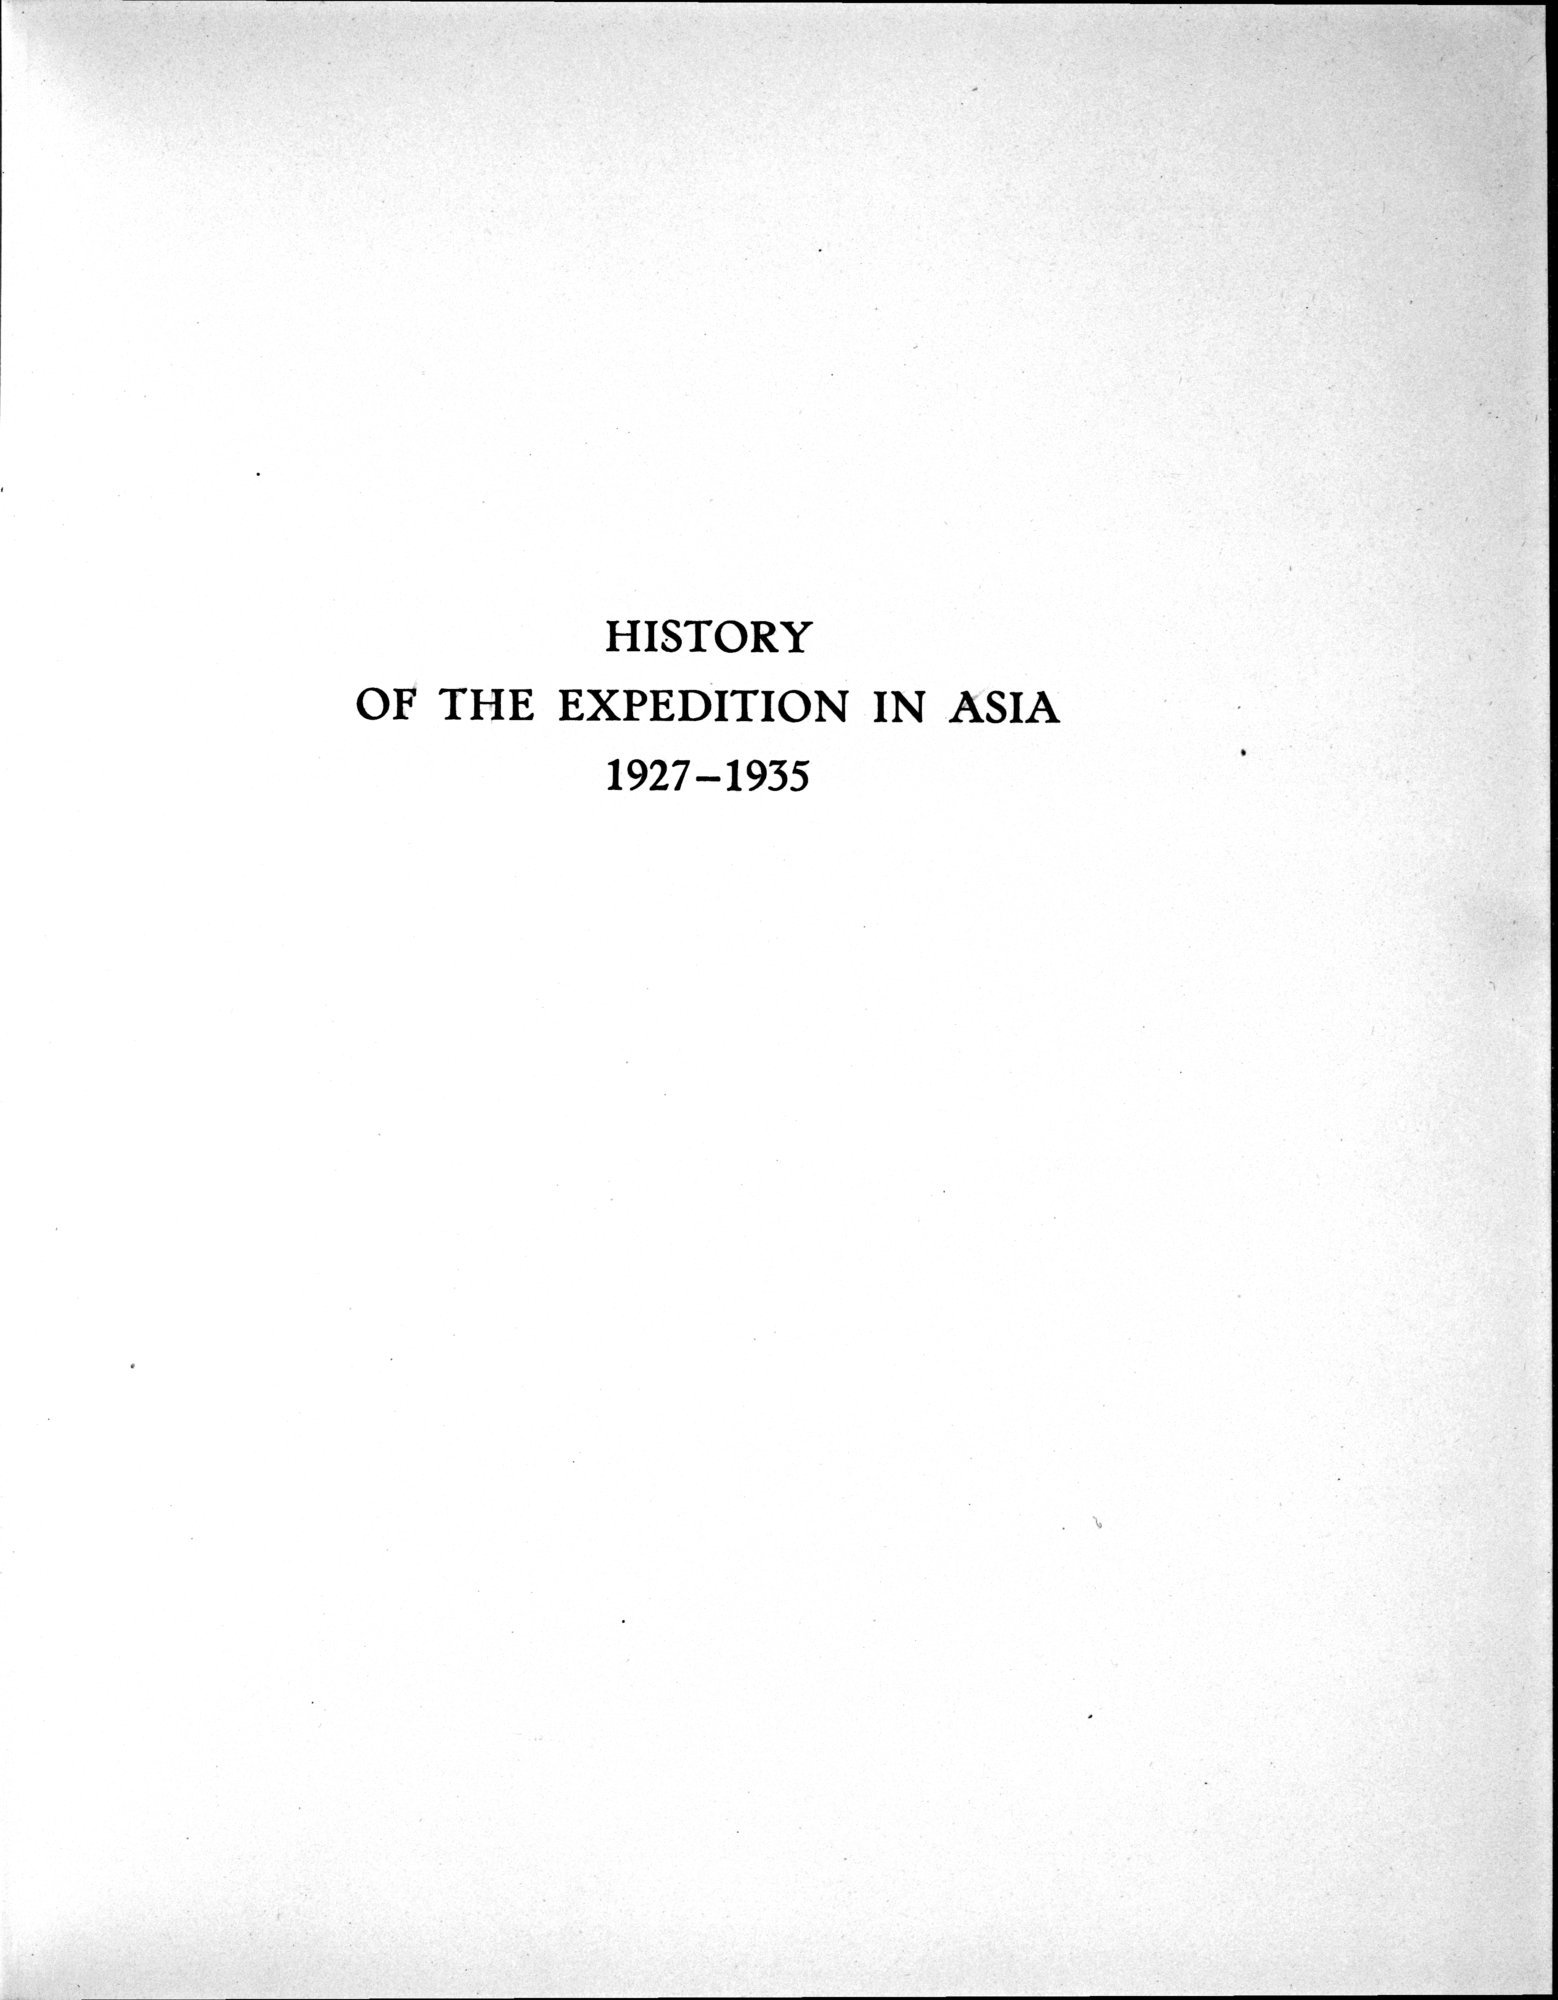 History of the Expedition in Asia, 1927-1935 : vol.3 / Page 9 (Grayscale High Resolution Image)